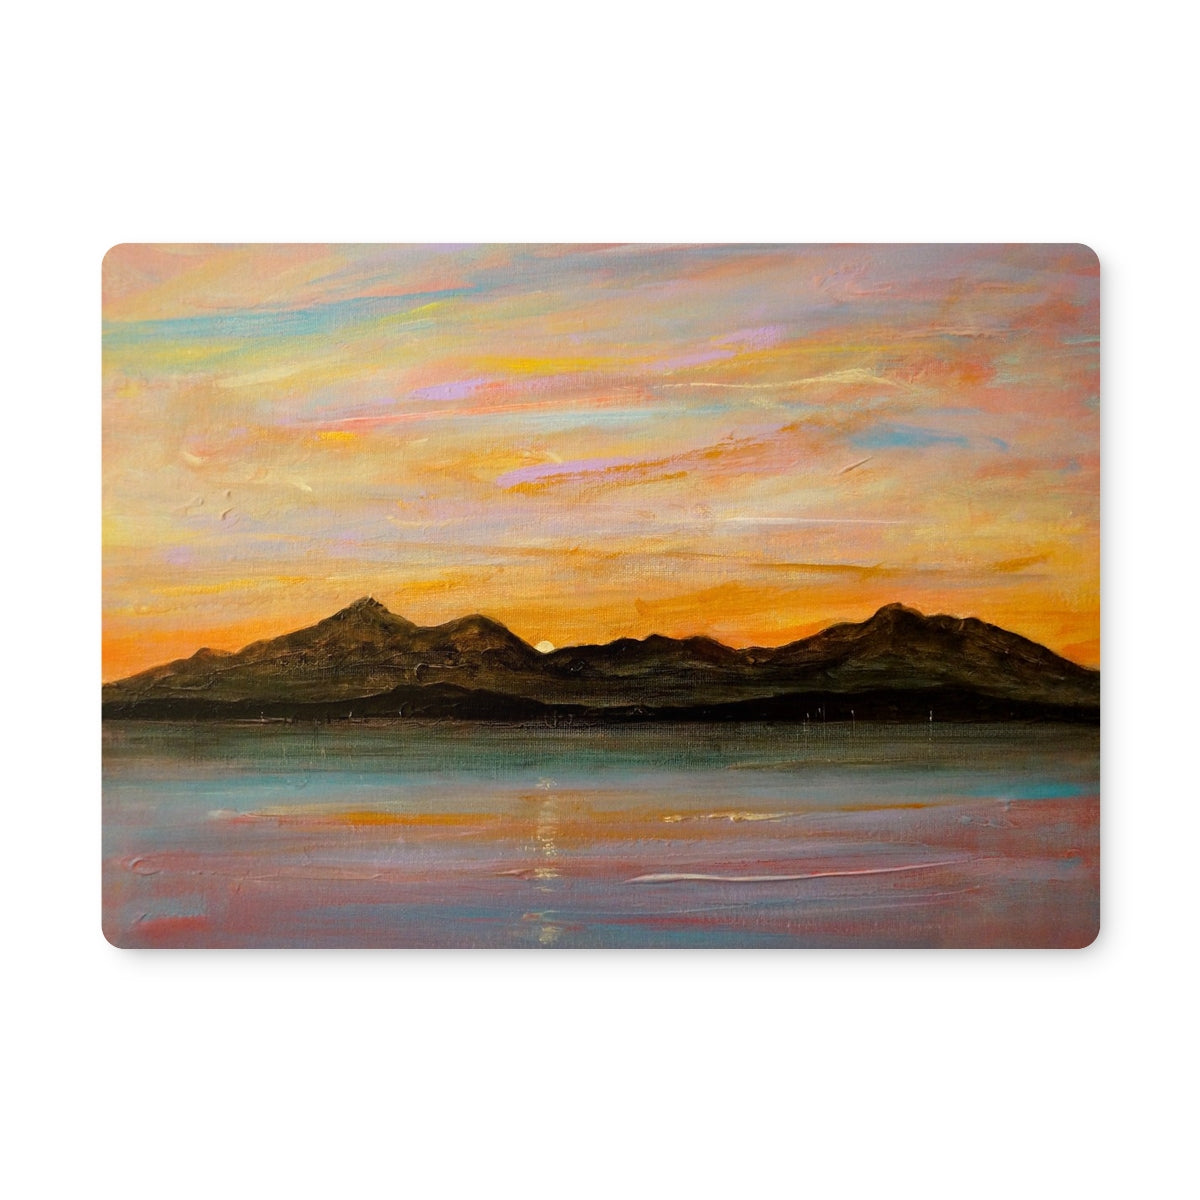 The Sleeping Warrior Arran Art Gifts Placemat-Placemats-Arran Art Gallery-6 Placemats-Paintings, Prints, Homeware, Art Gifts From Scotland By Scottish Artist Kevin Hunter